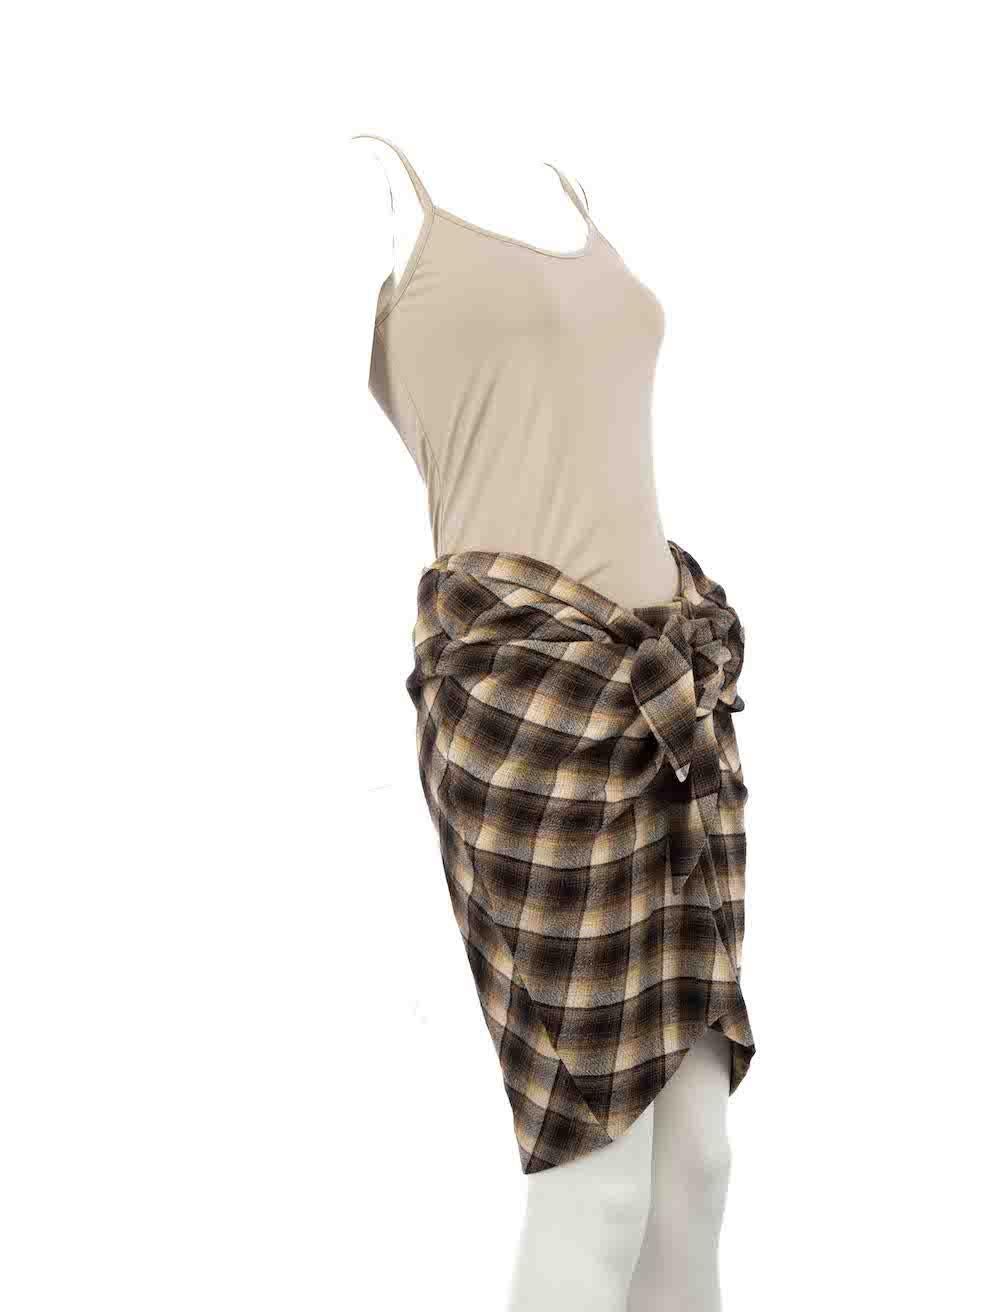 CONDITION is Very good. Hardly any visible wear to skirt is evident on this used Isabel Marant Étoile designer resale item.
 
 
 
 Details
 
 
 Brown
 
 Wool
 
 Skirt
 
 Tartan pattern
 
 Mini
 
 Draped hem
 
 Pleated detail
 
 
 
 
 
 Made in